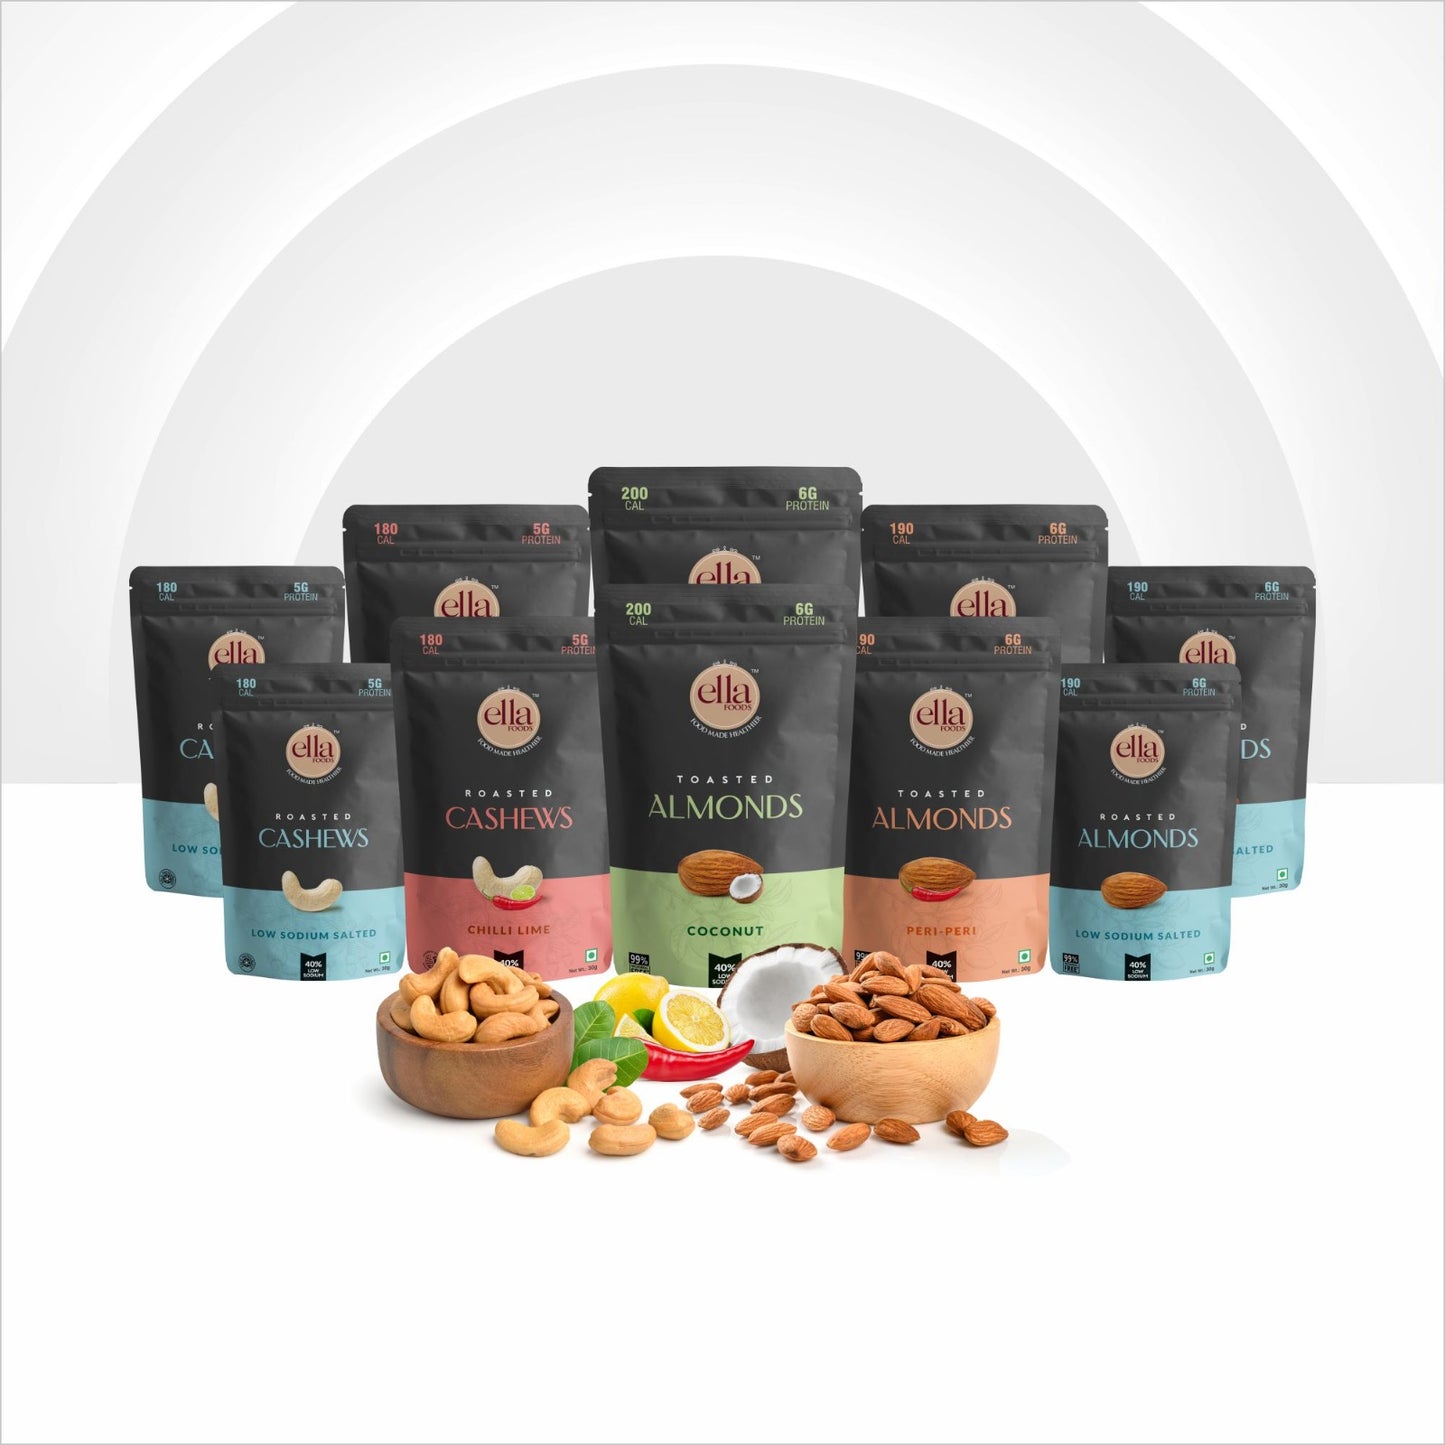 Ella Foods Assorted Nuts Pack of 5 |30 gm each| Salted Cashew| Salted Almonds| Chili Lime Cashew| Coconut Toasted Almond| Peri Peri Almond| Snacks